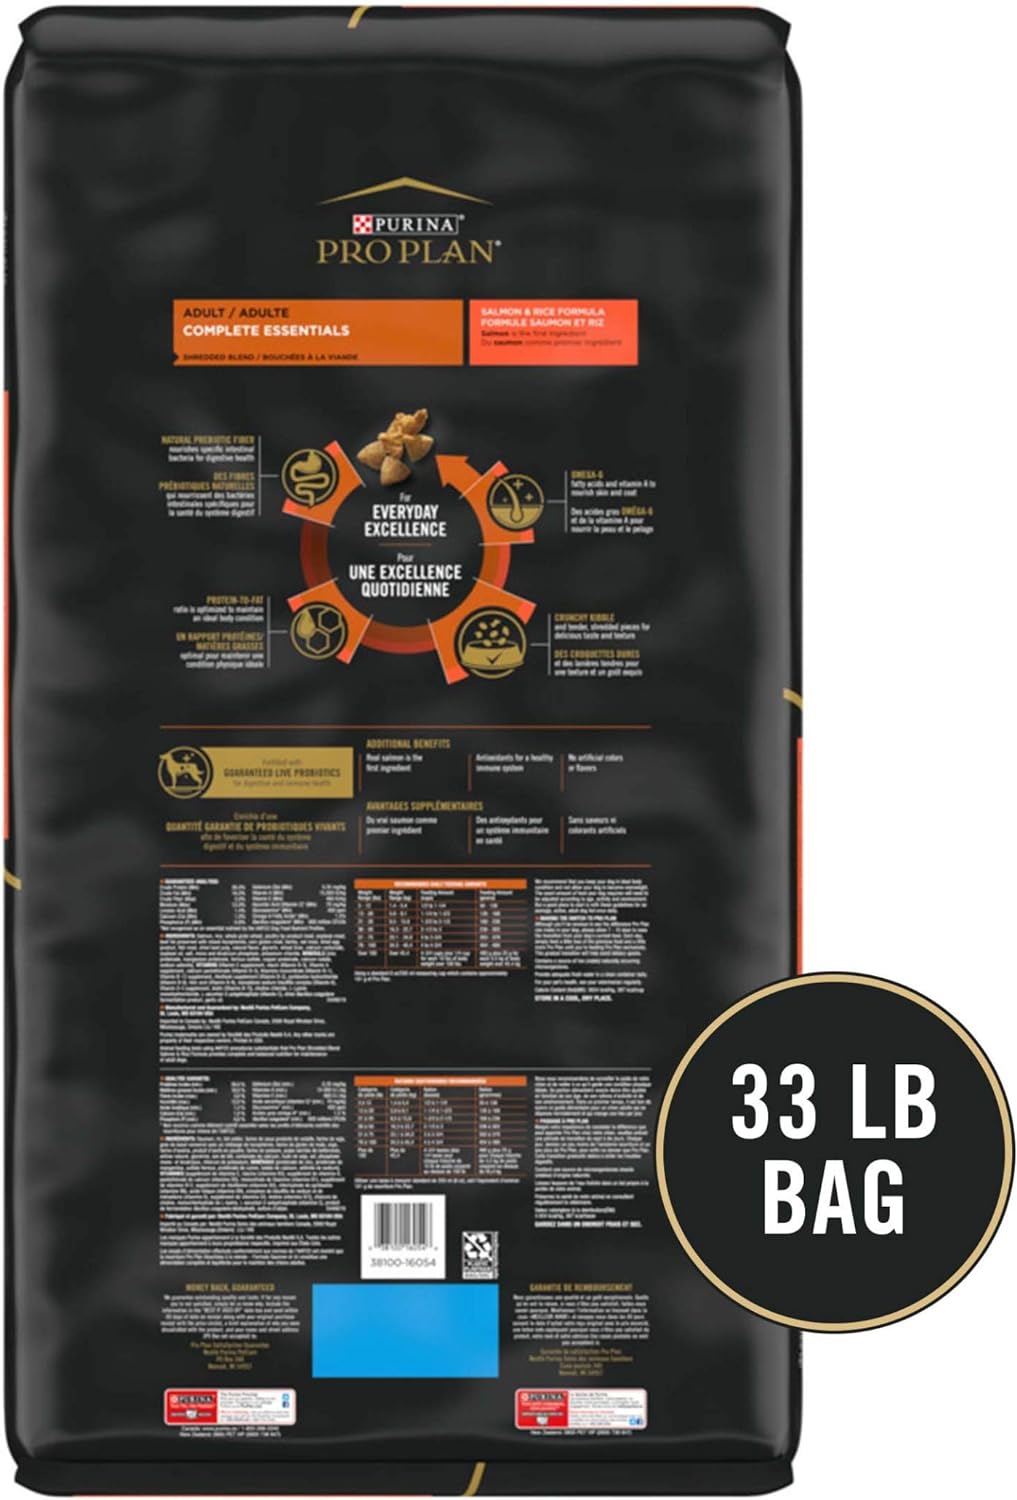 Purina Pro Plan High Protein Dog Food With Probiotics for Dogs, Shredded Blend Salmon & Rice Formula - 33 lb. Bag : Pet Supplies